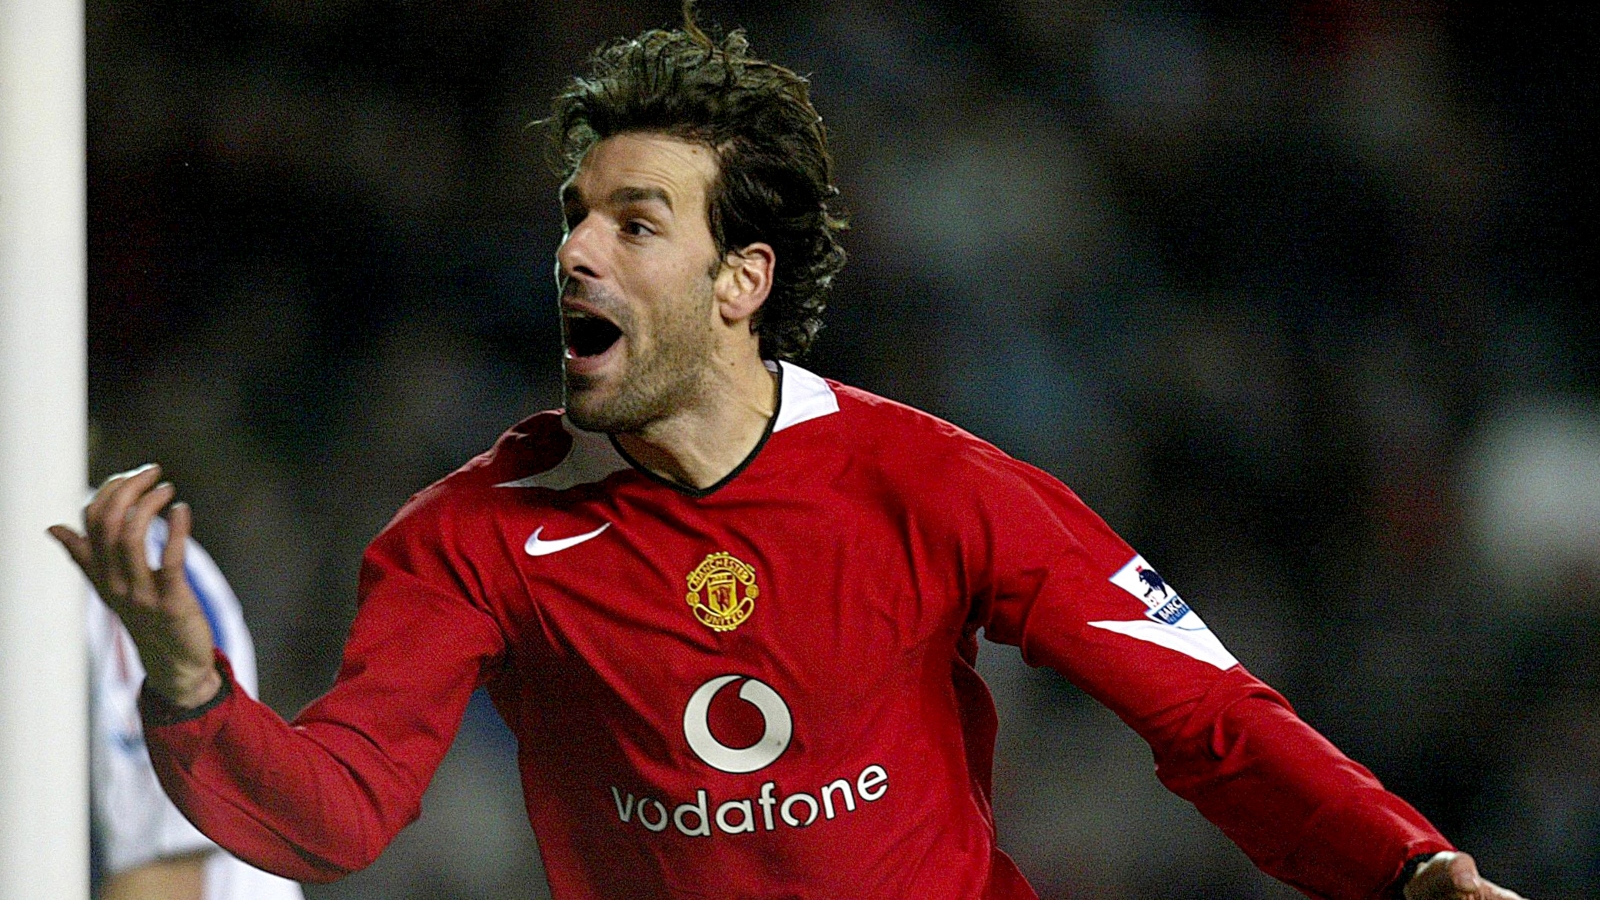 Ruud Van Nistelrooy was a goal machine in his playing days at United.